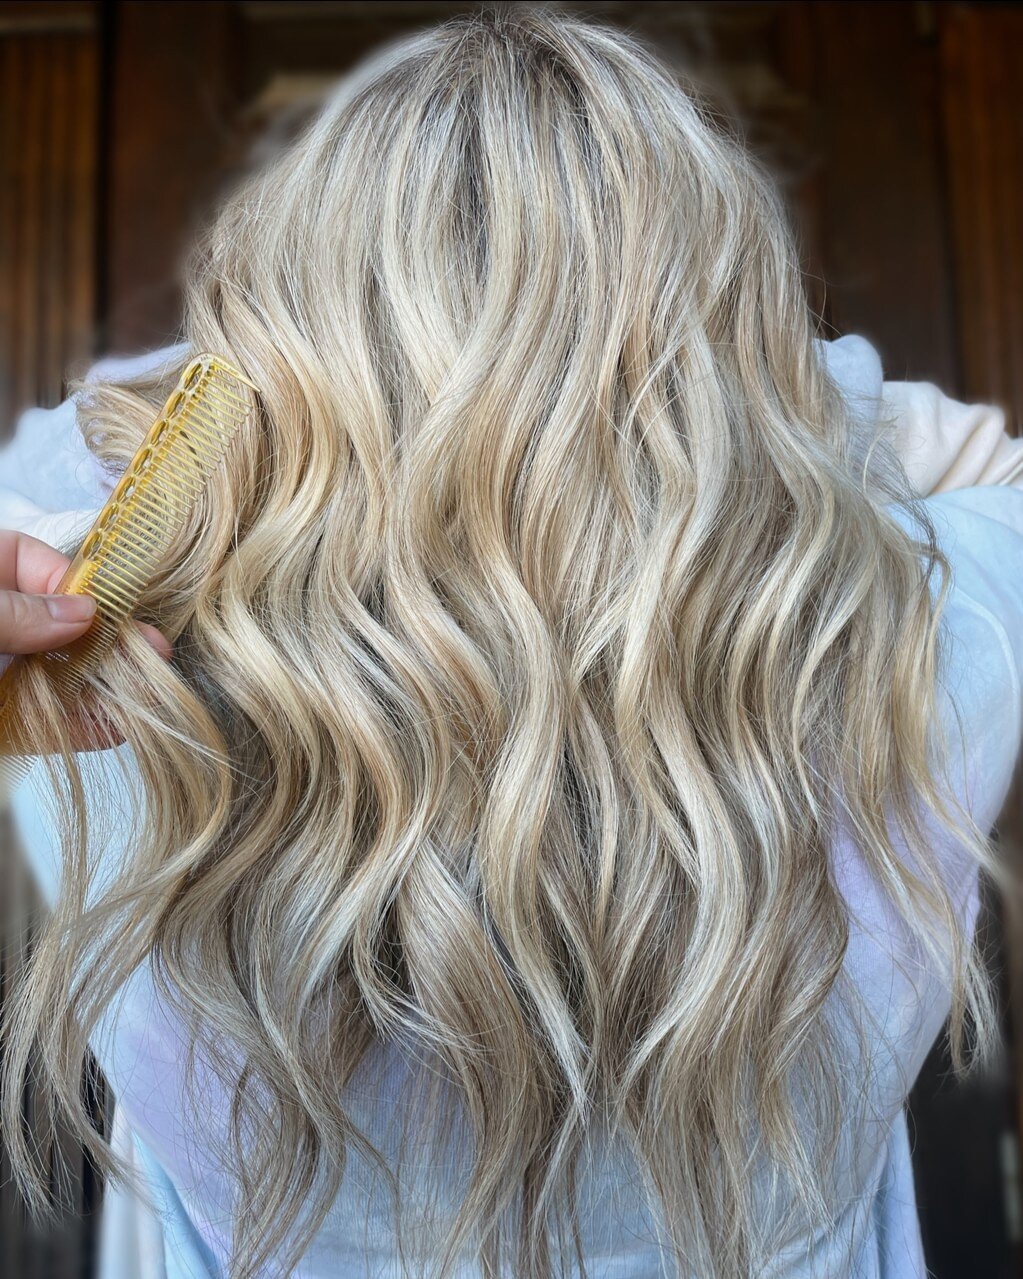 @_mollyjanehair is here to make sure your hair is light and bright in time for summer! Molly loves using the Heart of Glass Sheer Glaze when heat styling blonde hair to keep it healthy. Have you tried it for yourself? ☀️ ​​​​​​​​​

#knoxville #knoxvi